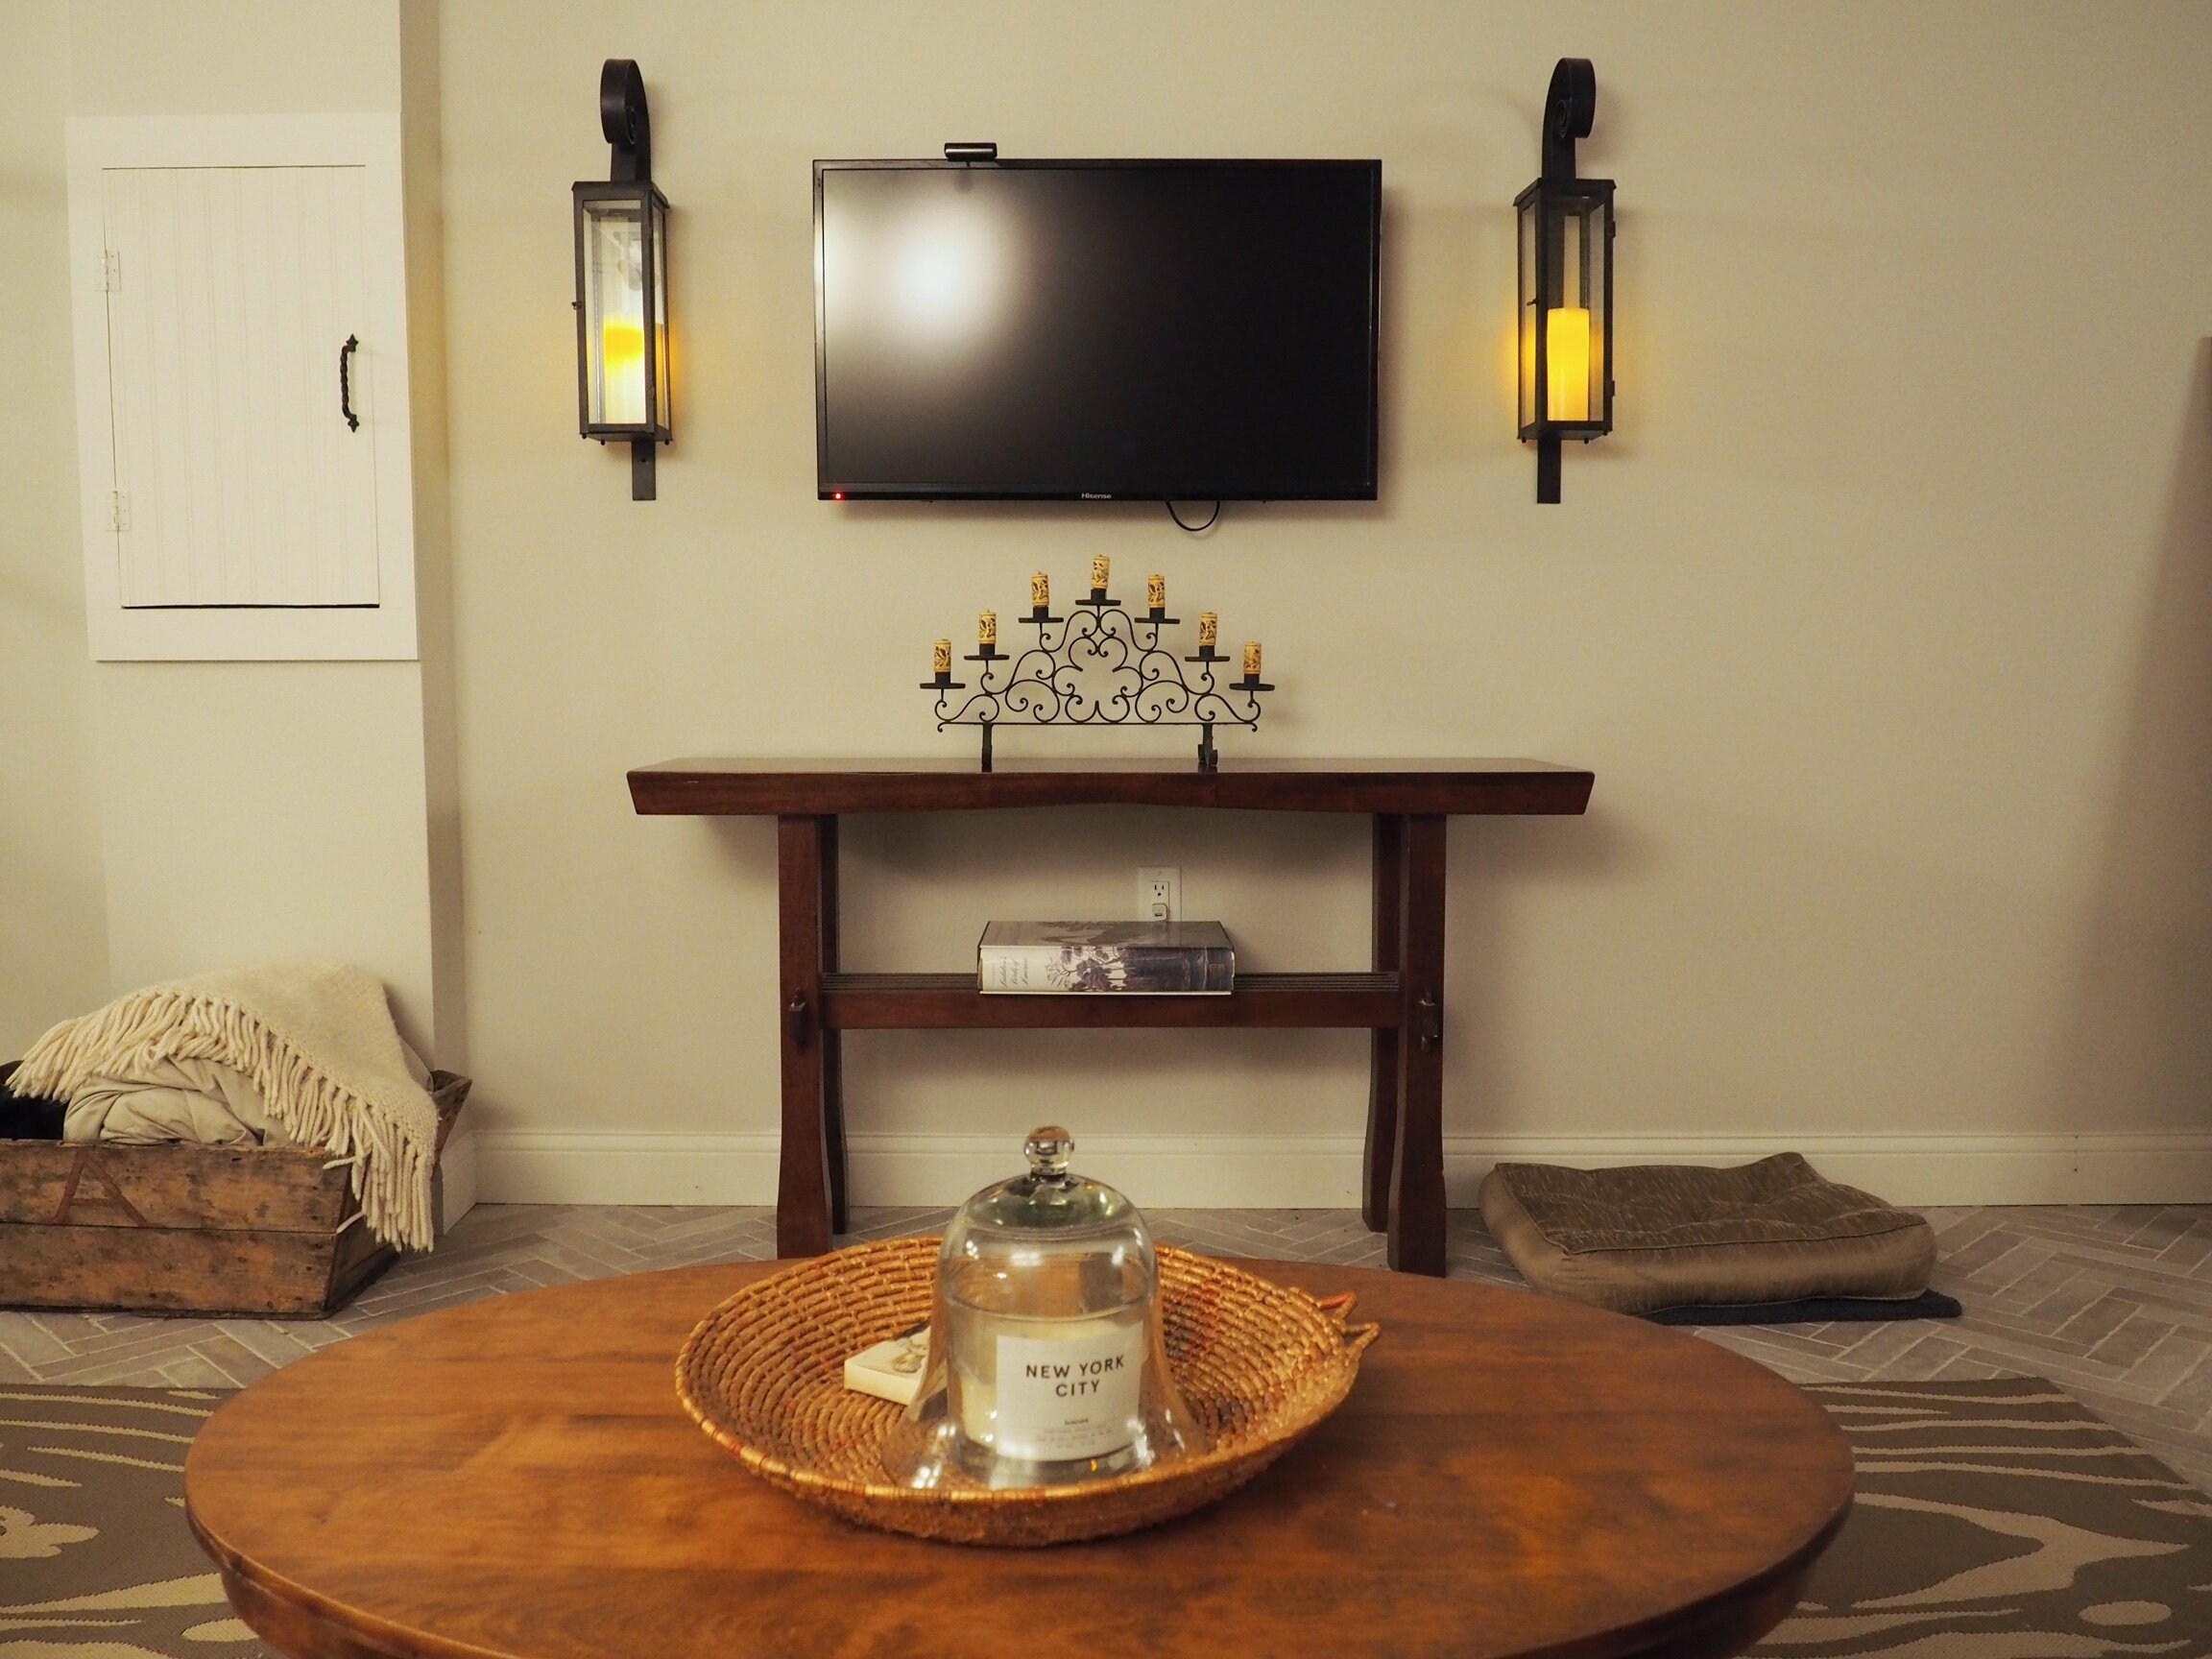 Iron candle sconces add warmth and interest to the TV wall; the console table holds a wrought iron candelabra with wine cork candles.